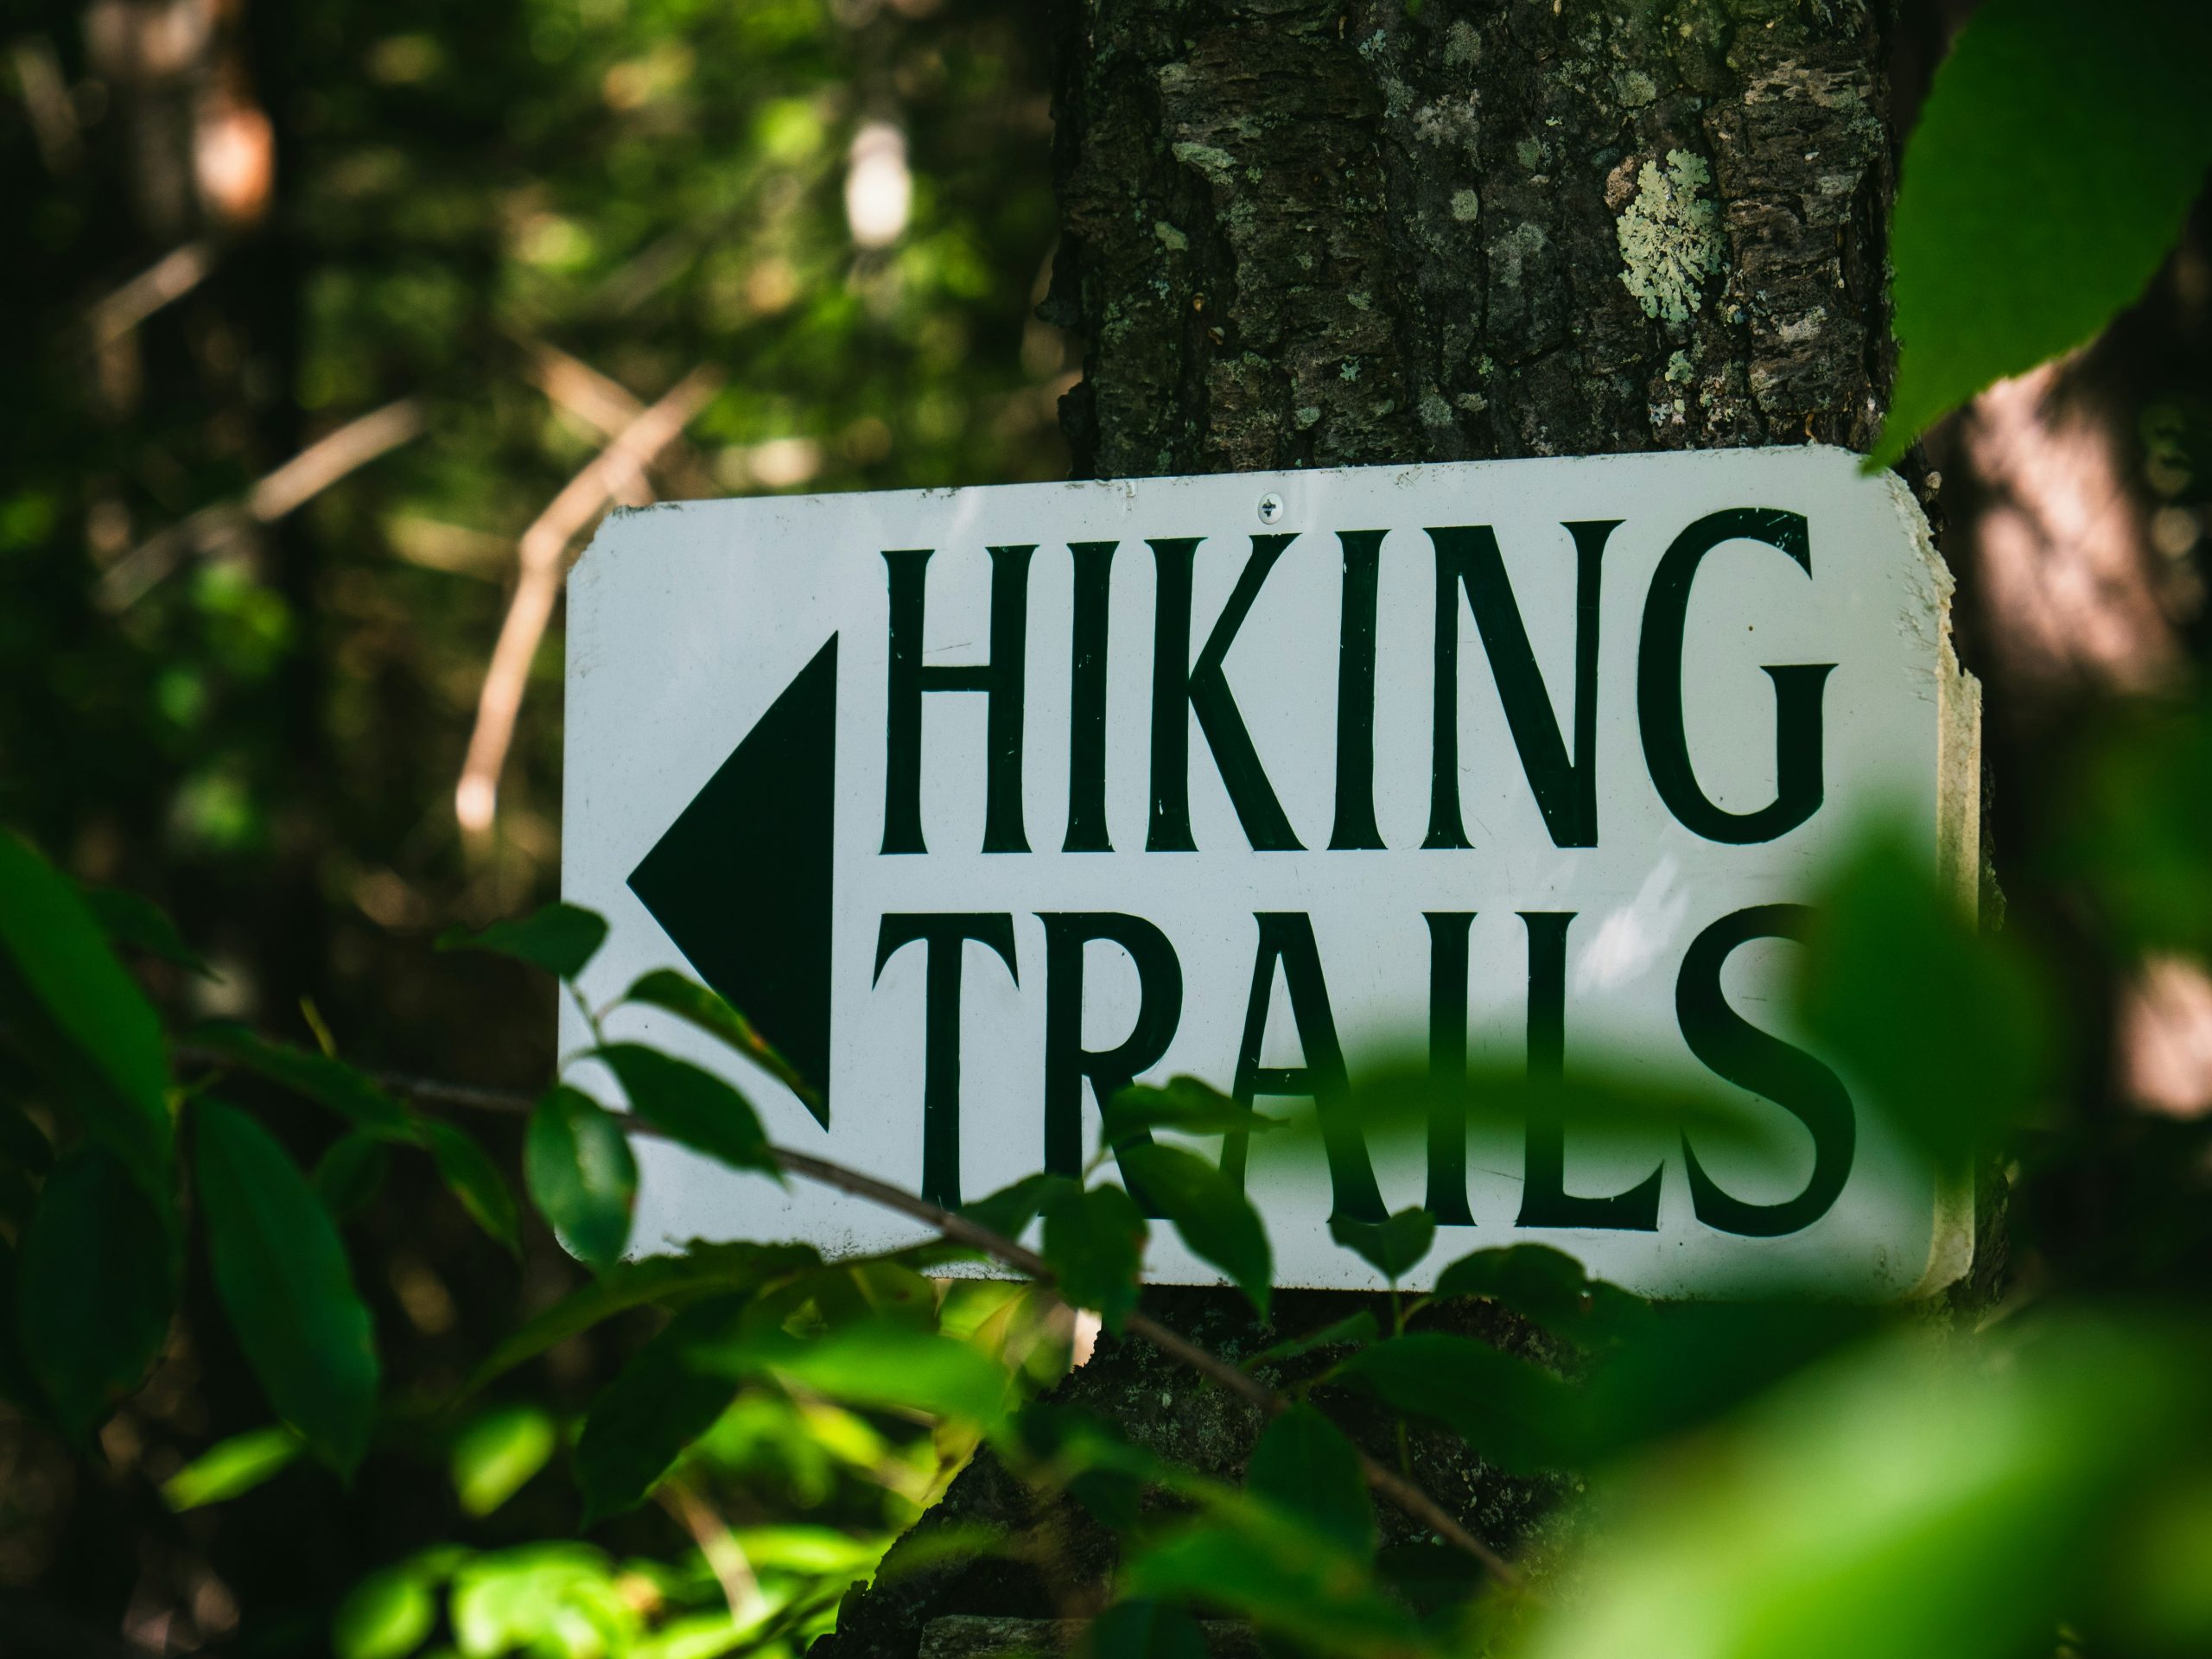 discover the most scenic hiking trails near you with our comprehensive guide to outdoor adventure. find the best hiking routes for all skill levels and immerse yourself in nature's beauty.